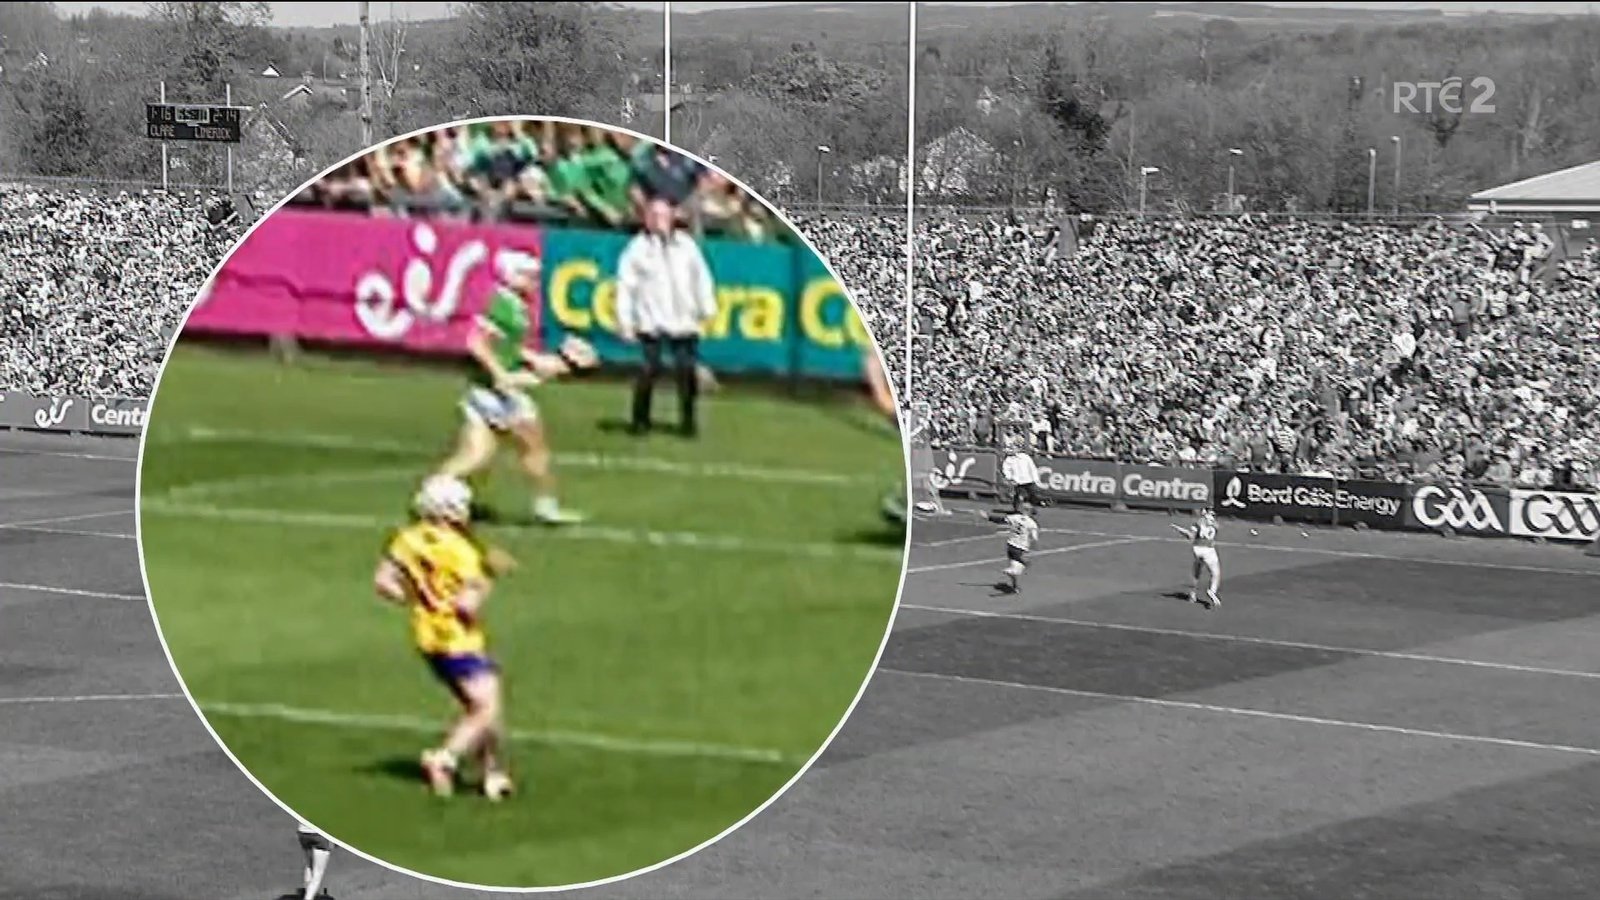 Clare can't blame square balls for collapse